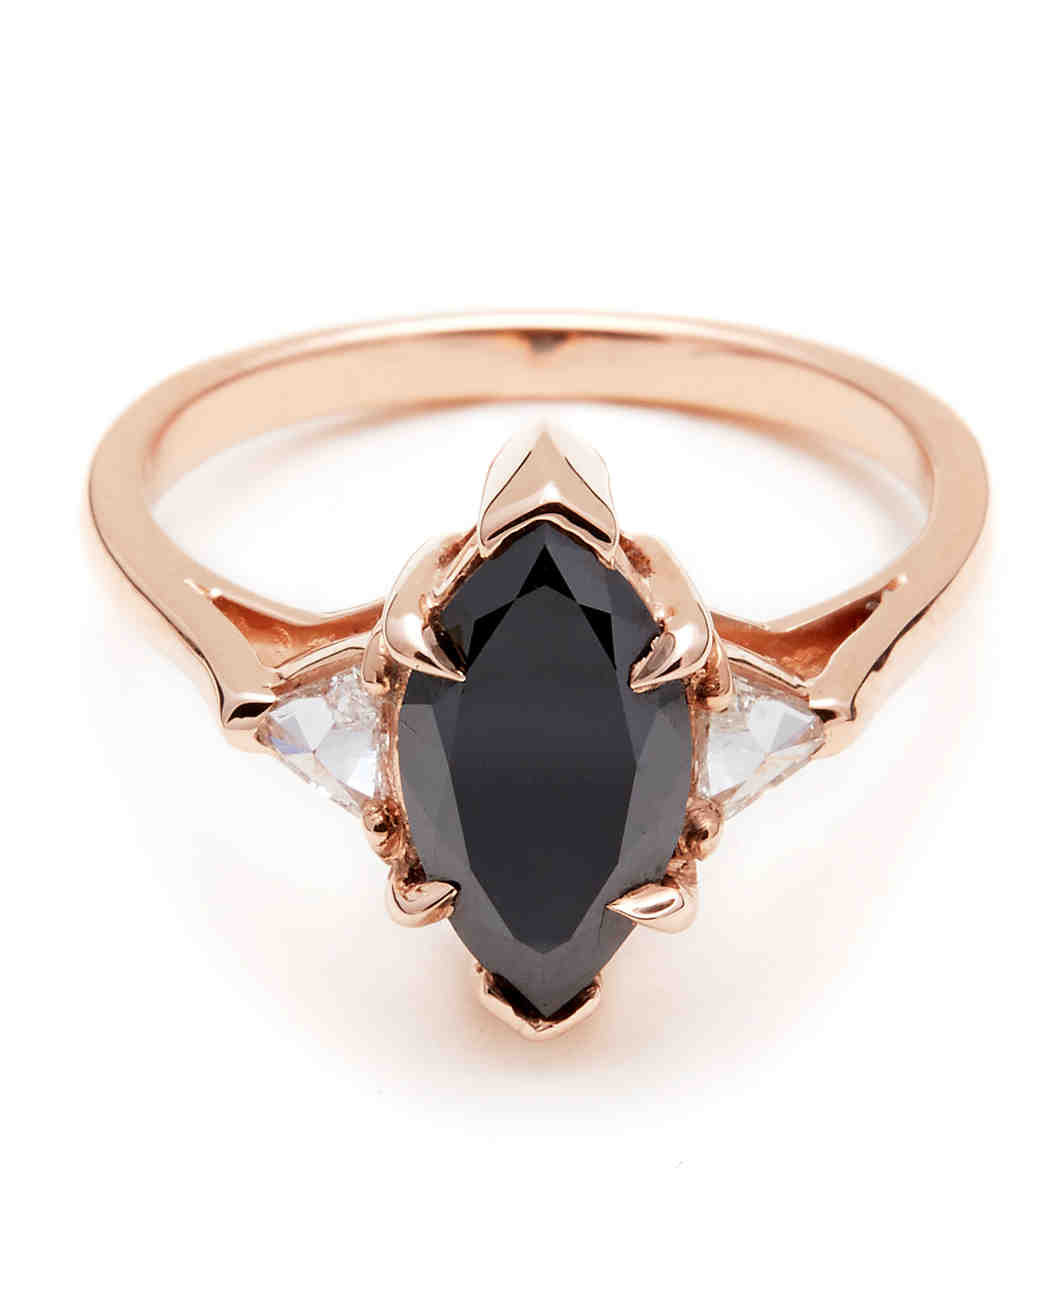 Black Diamond Ring Engagement
 The New LBD The Little Black Diamond Engagement Ring